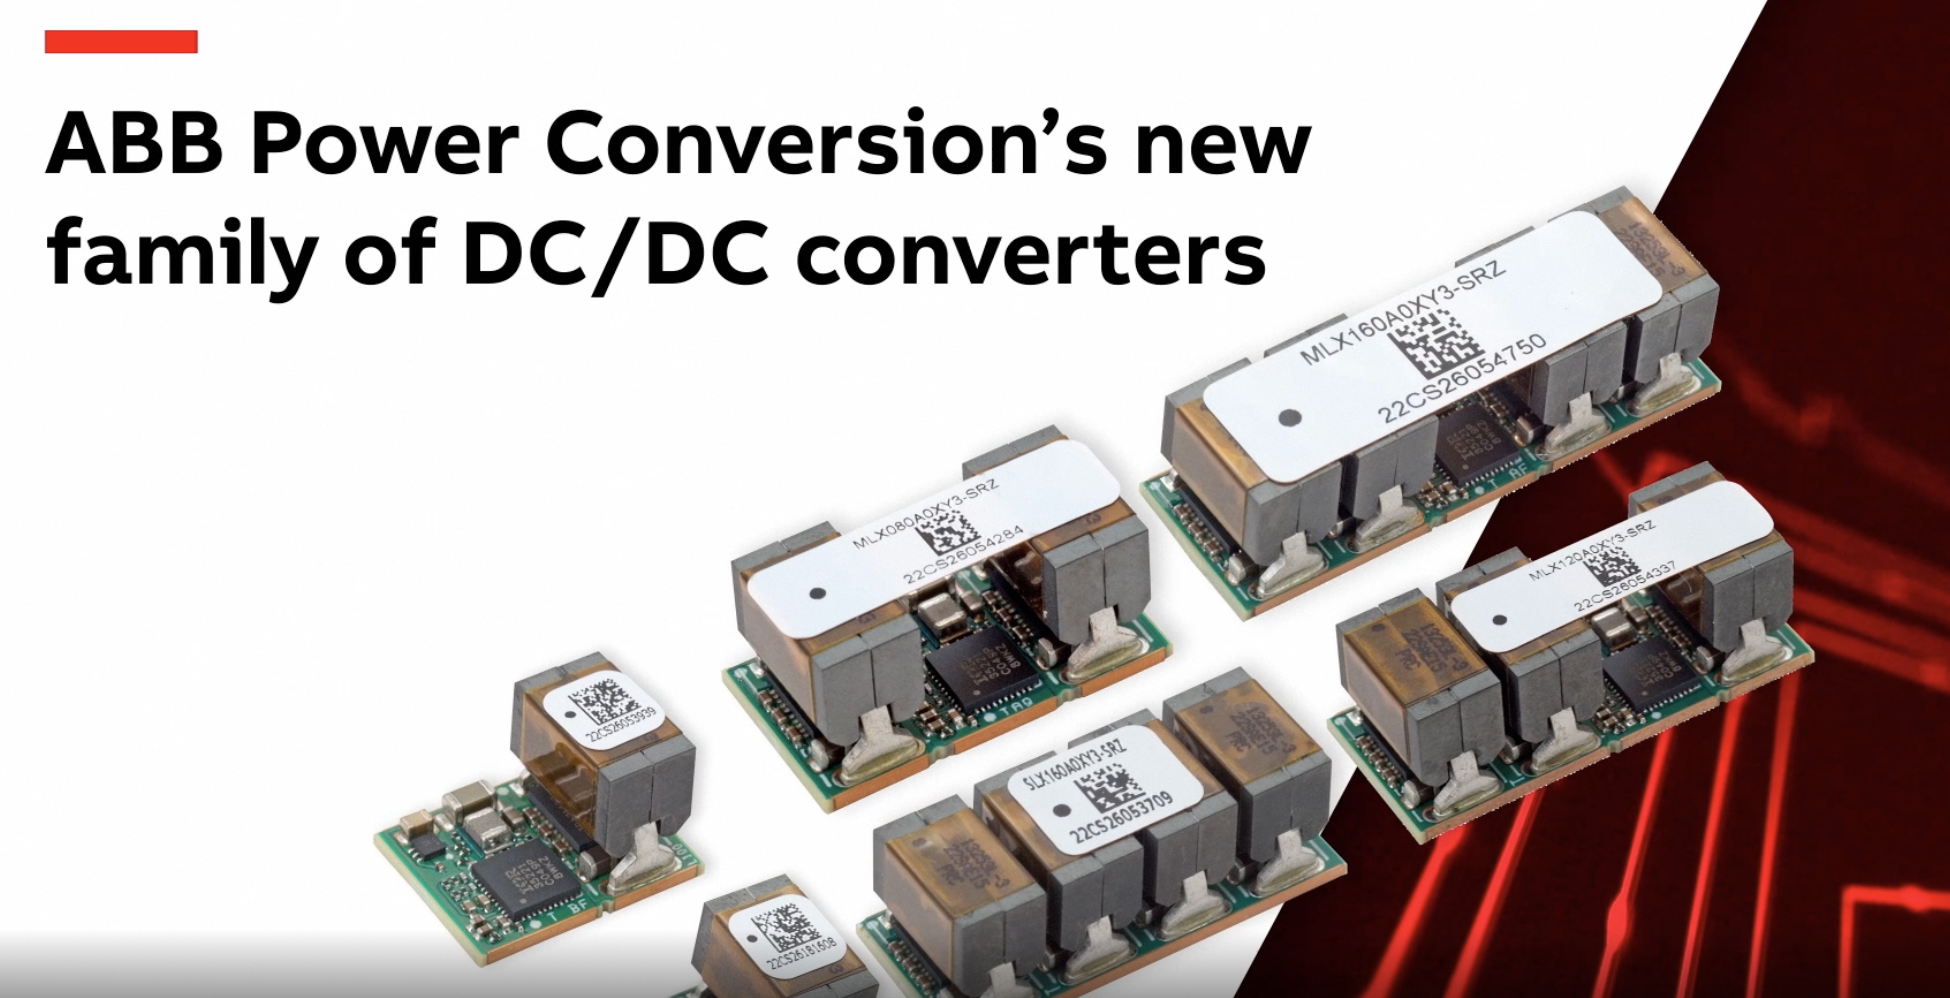 DC/DC Converters Provide Flexible, Power-Dense Solutions for Data-Hungry Applications